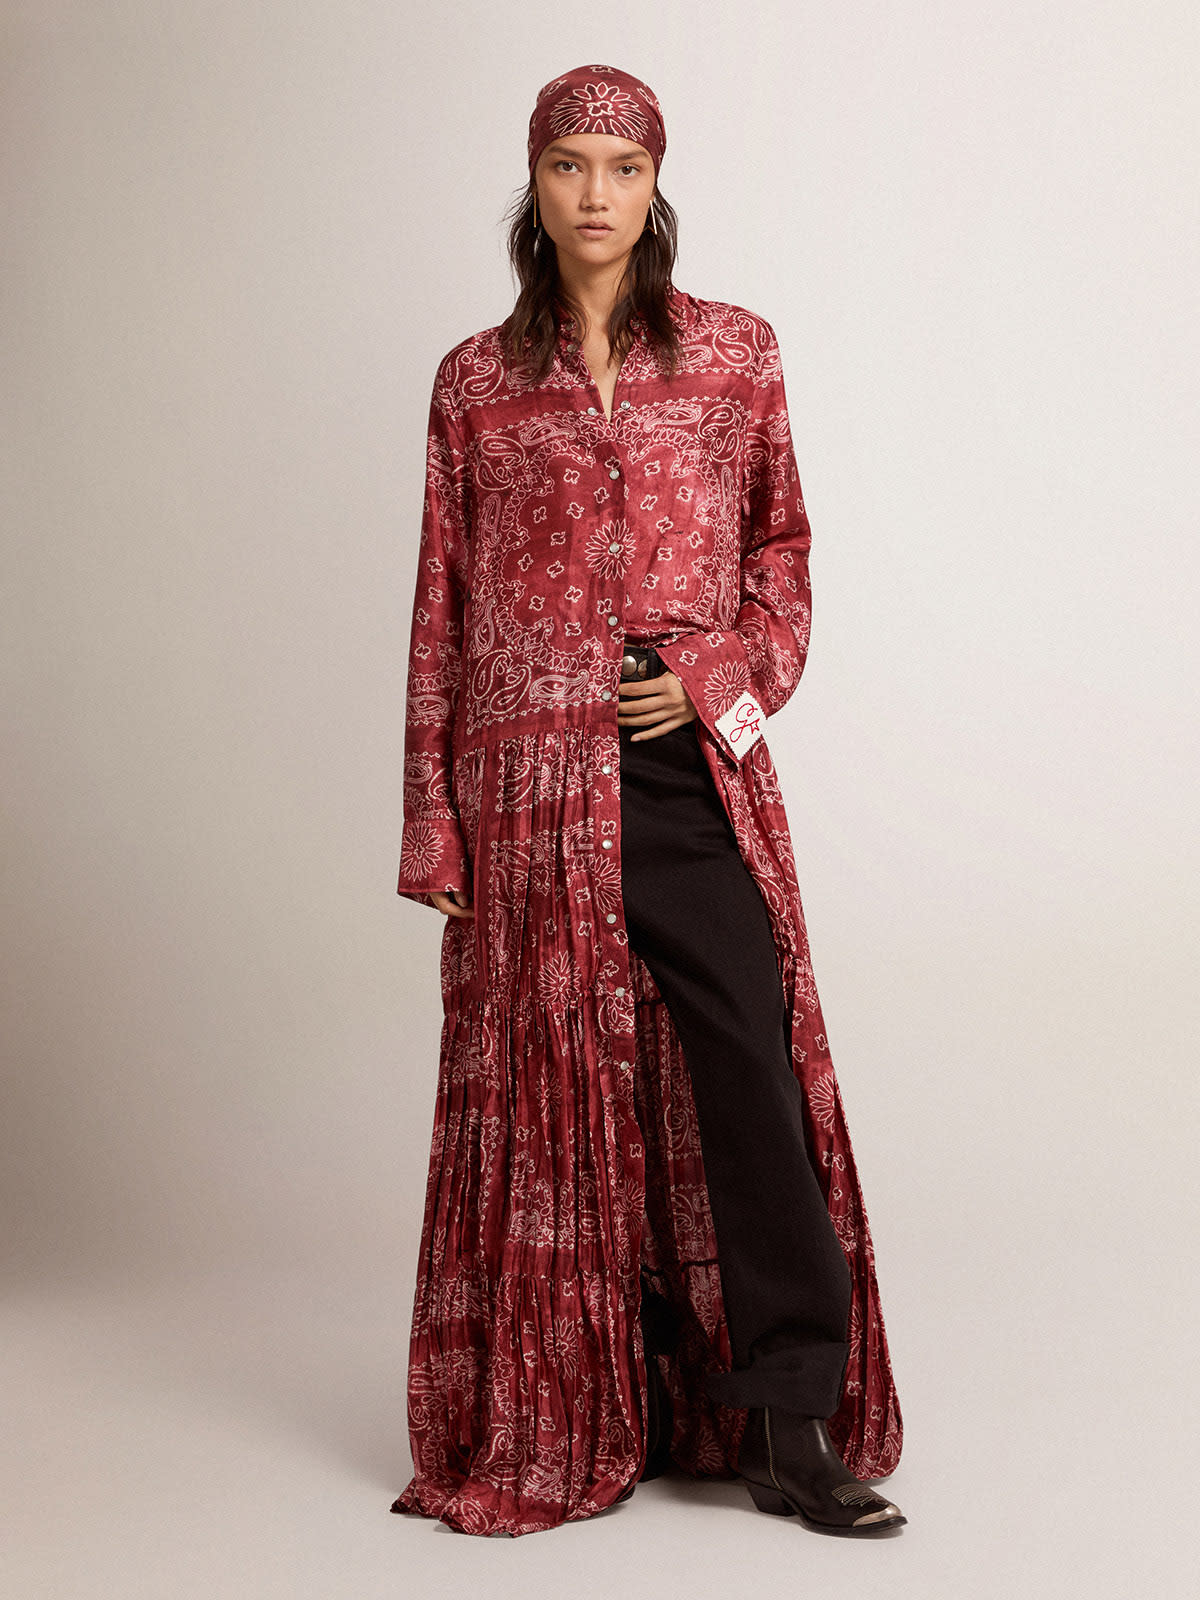 Golden Goose - Golden Collection shirt dress in burgundy with paisley print in 